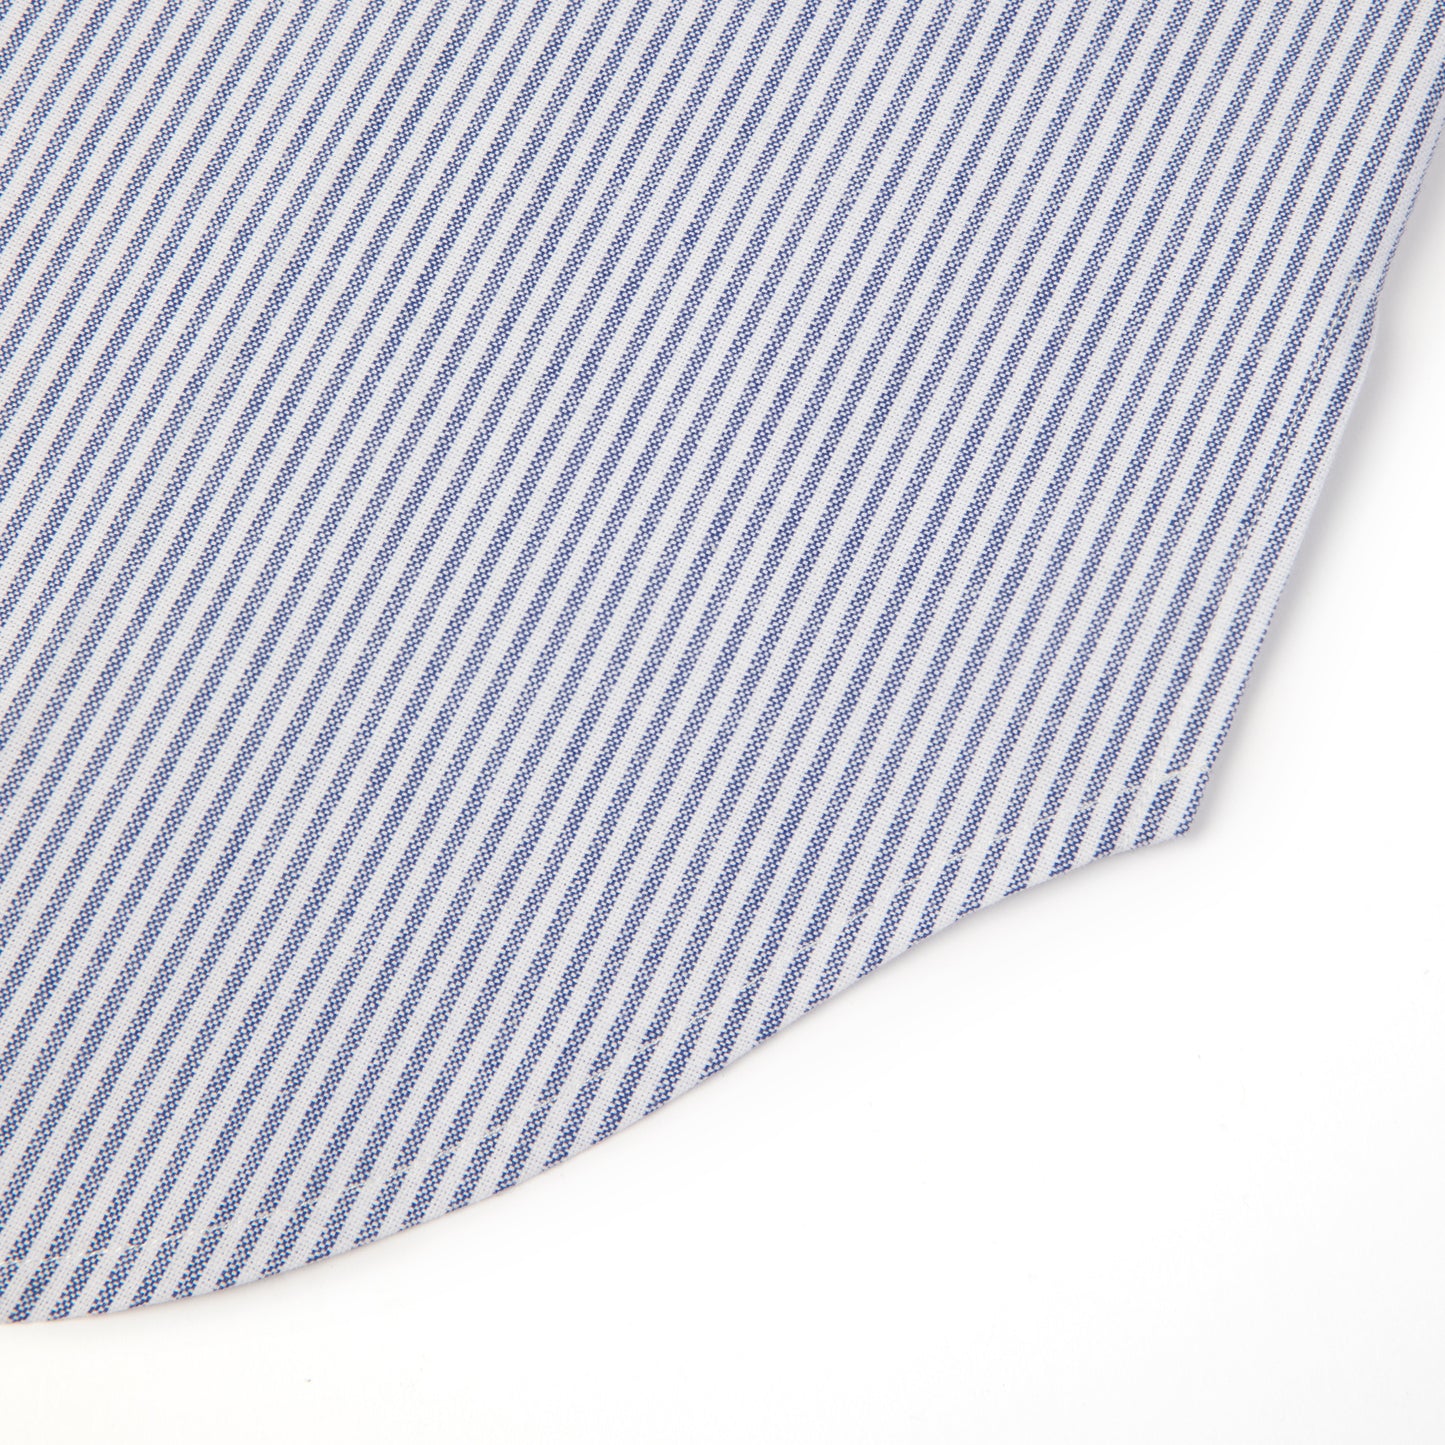 THE PERFECT SHIRT (NAVY AND WHITE STRIPE)